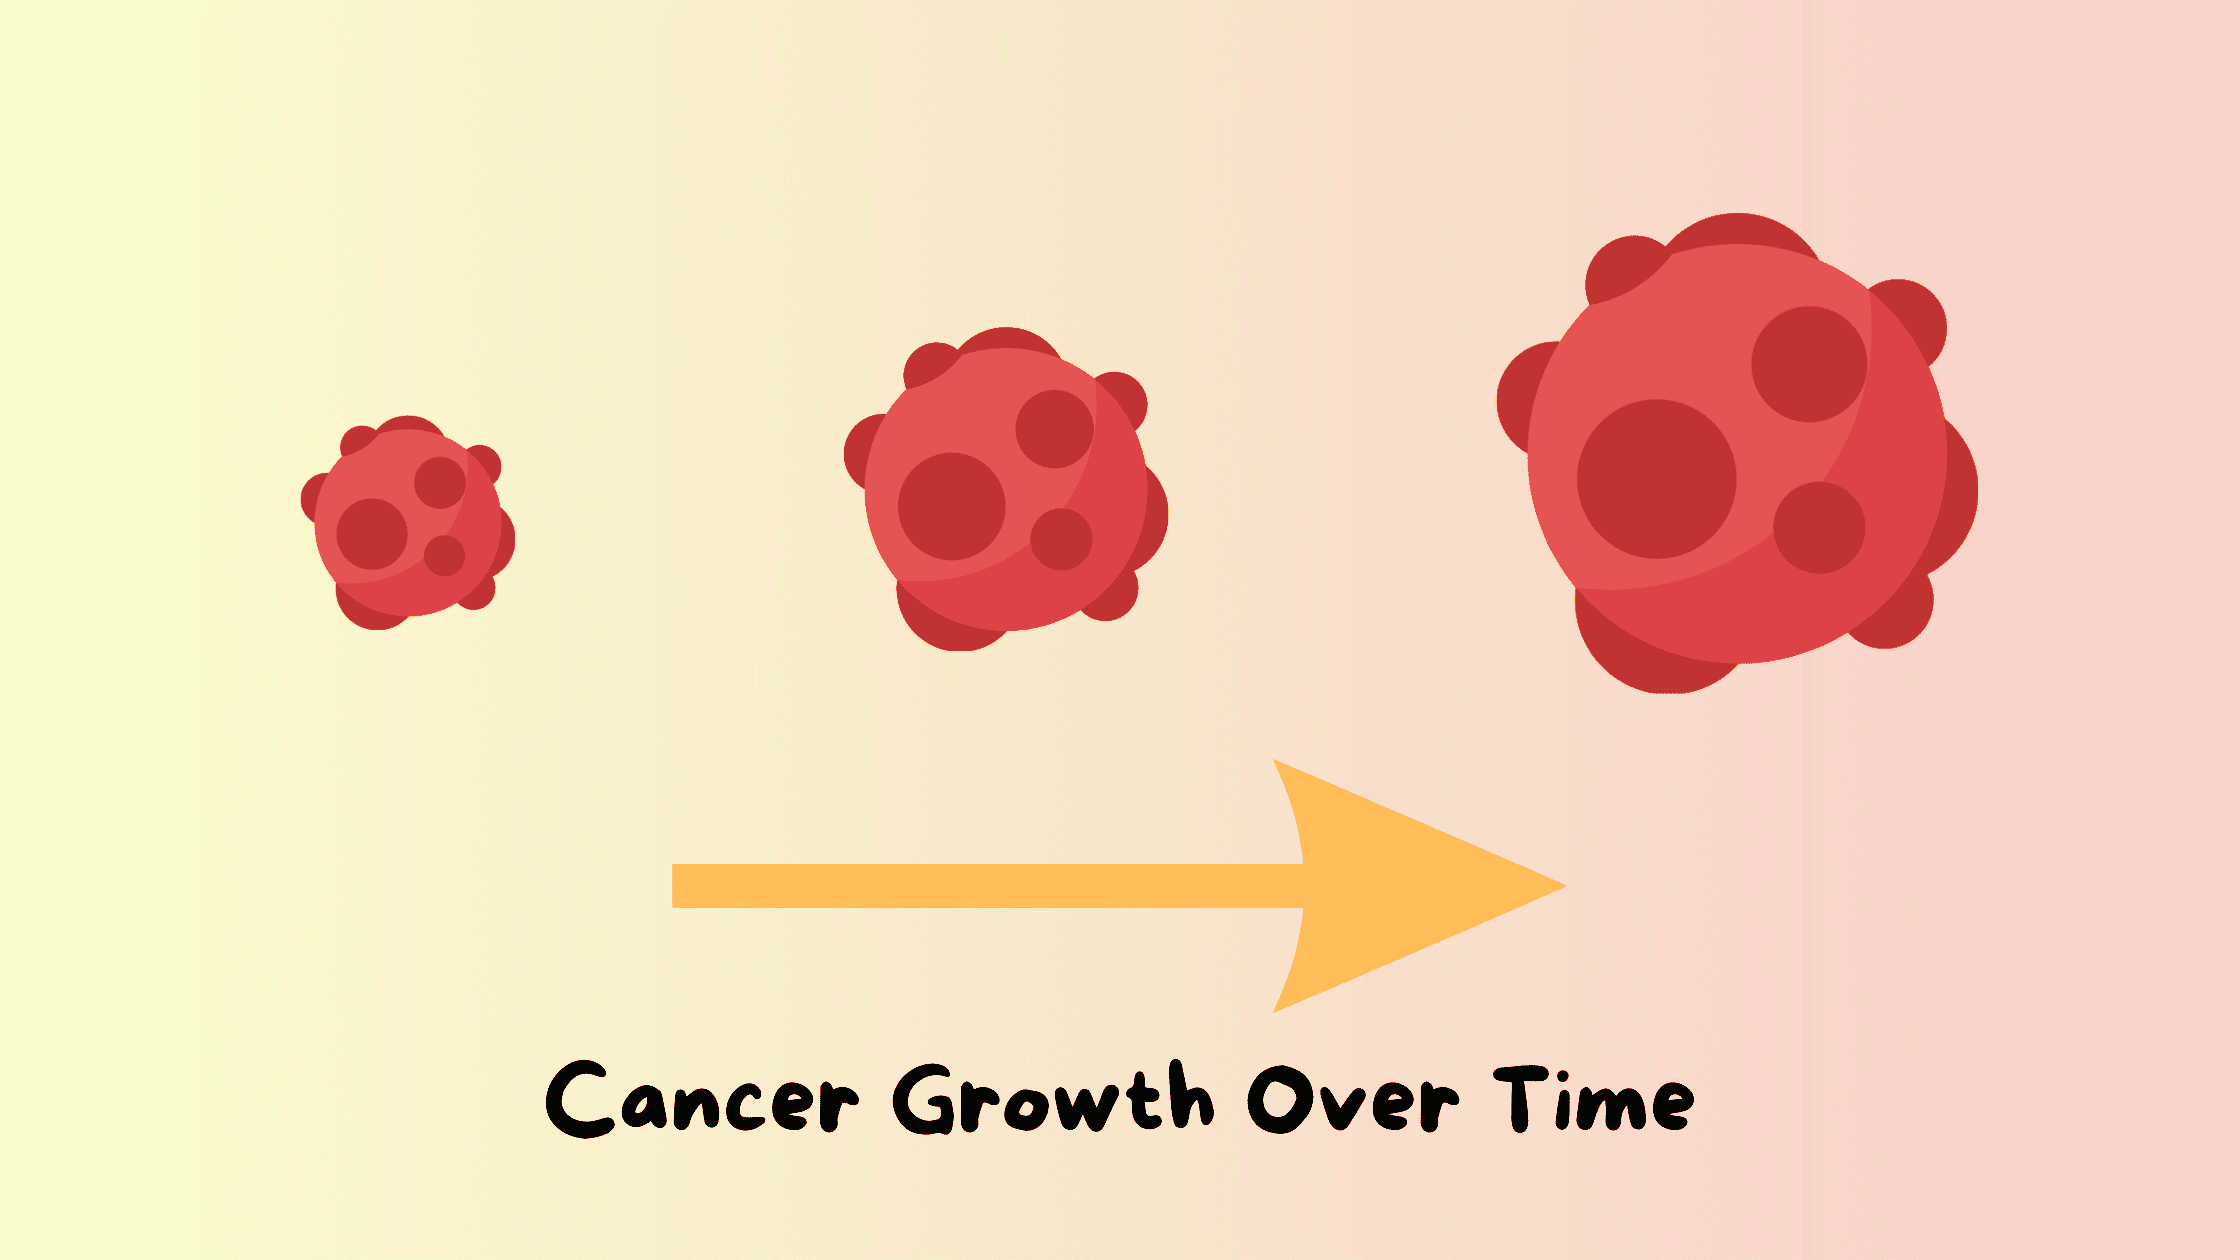 Growth of a malignant tumor over time